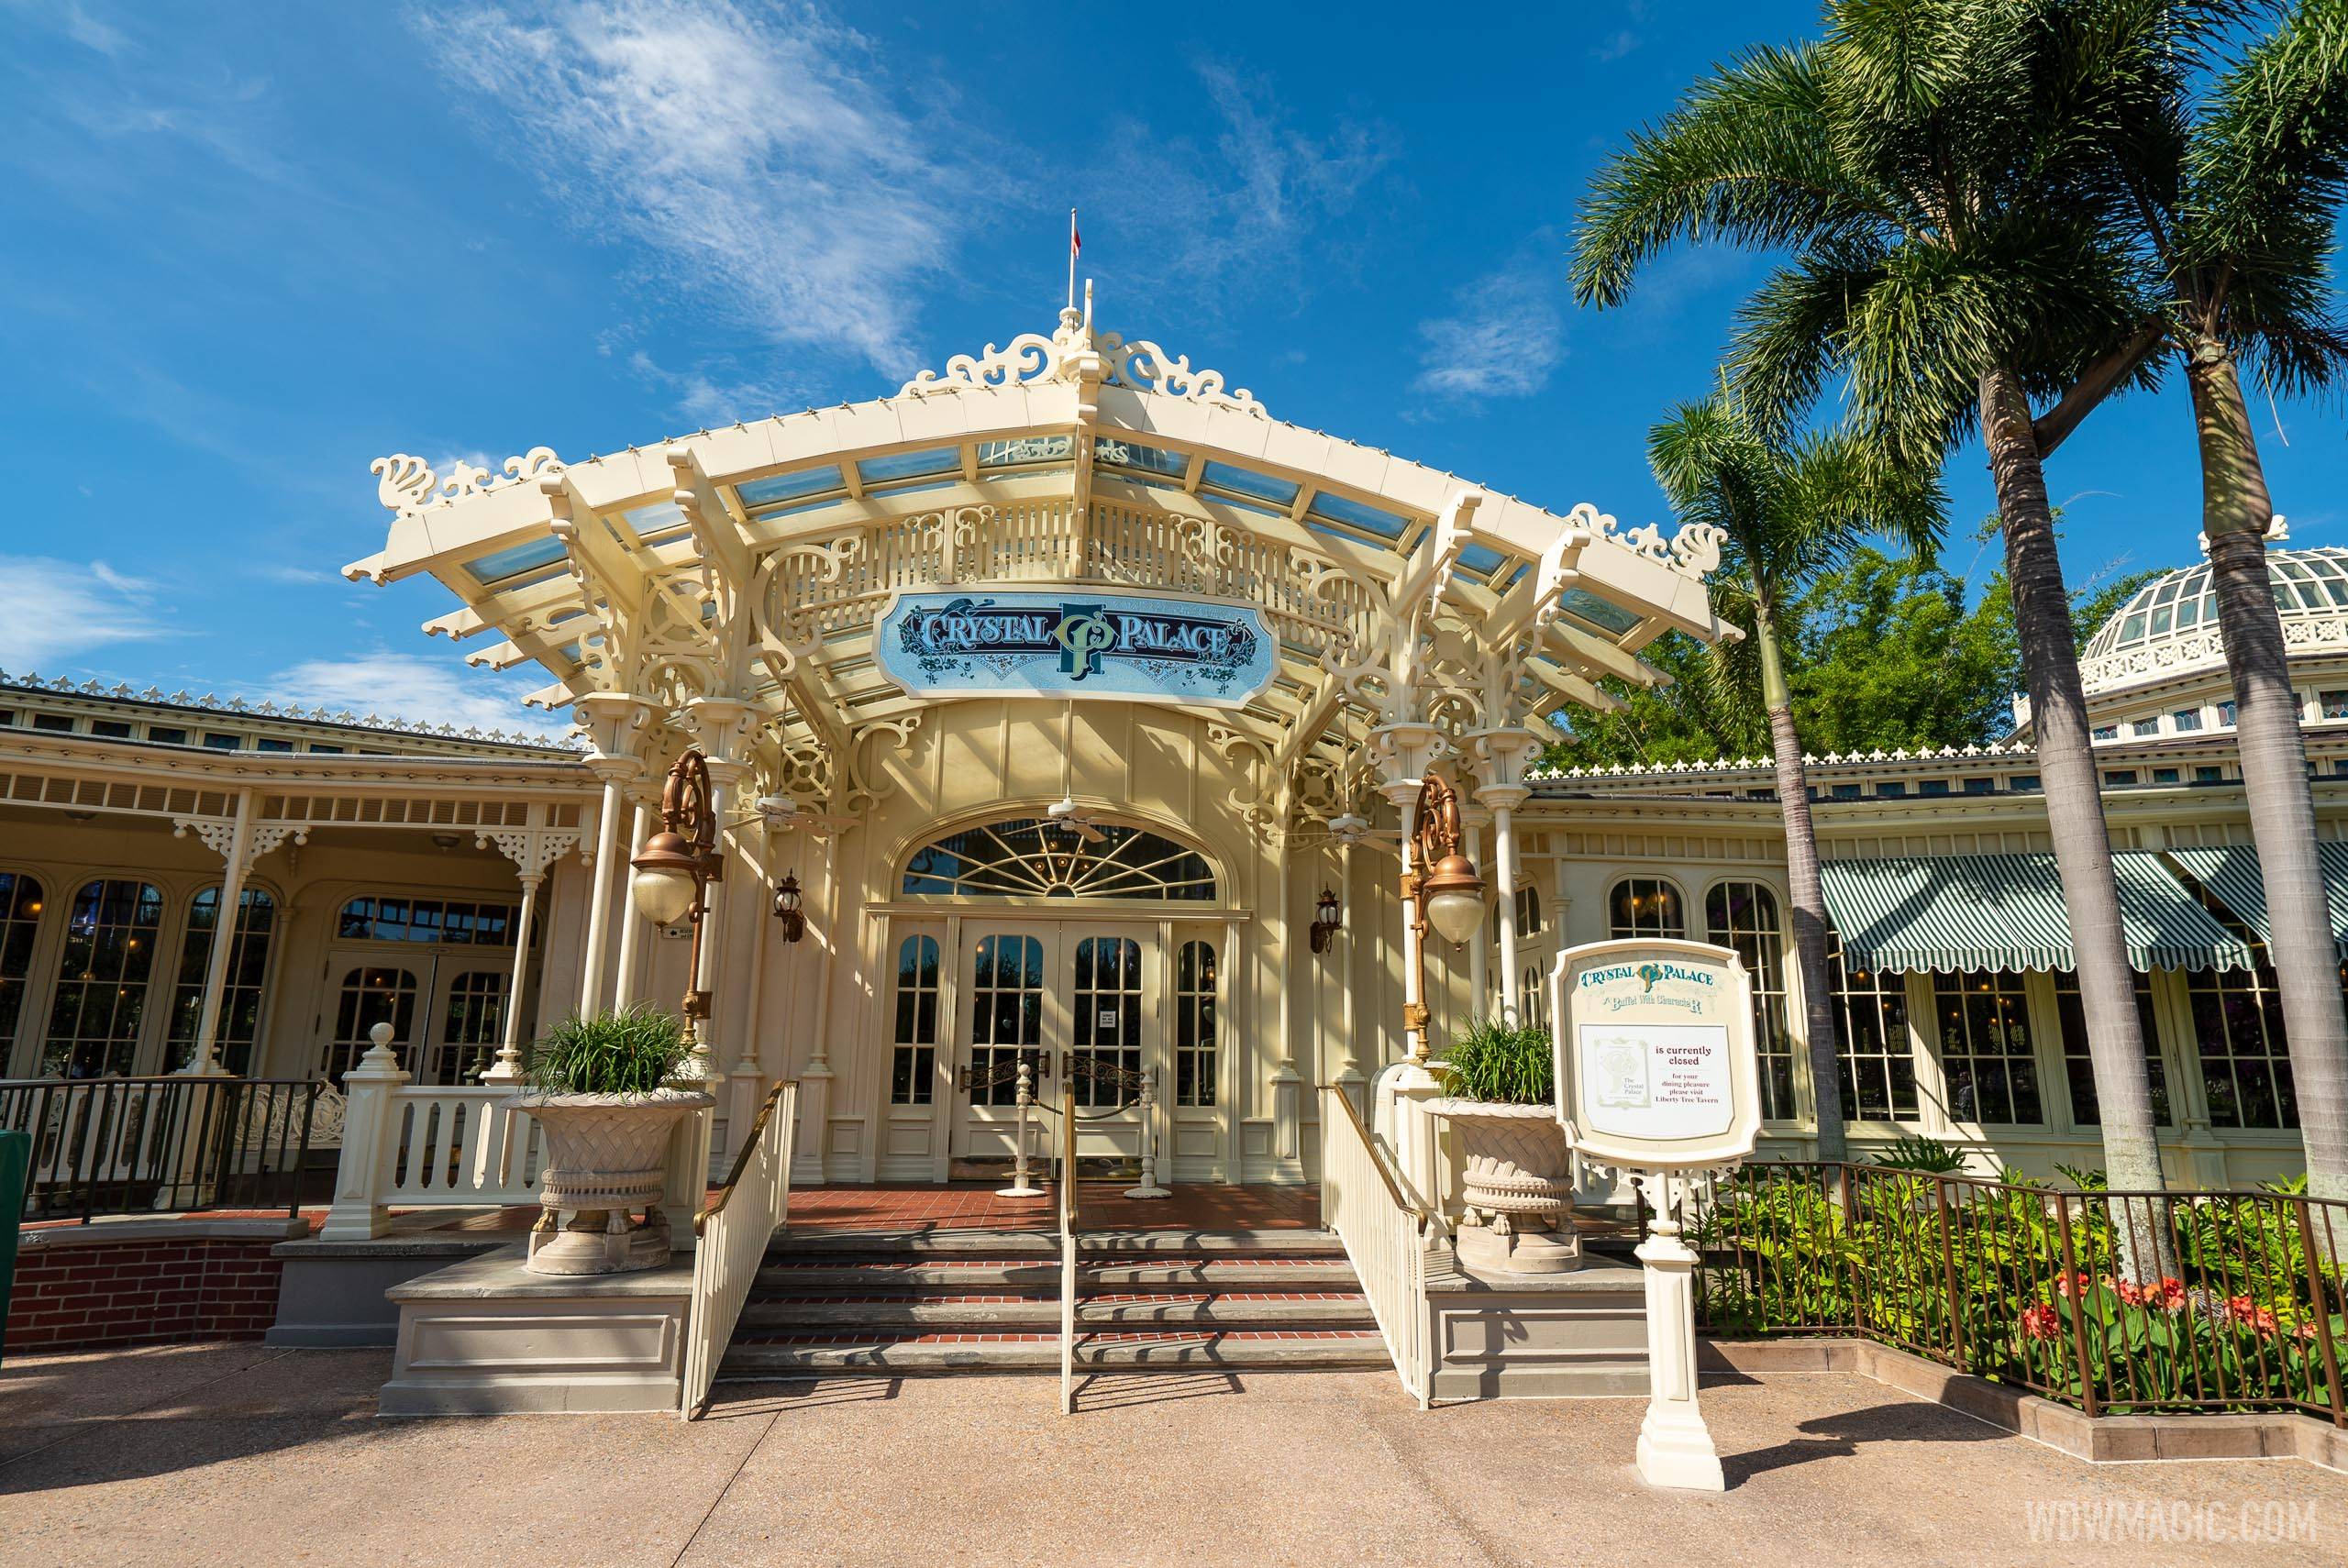 Character breakfast dining returning to The Crystal Palace at Walt Disney World